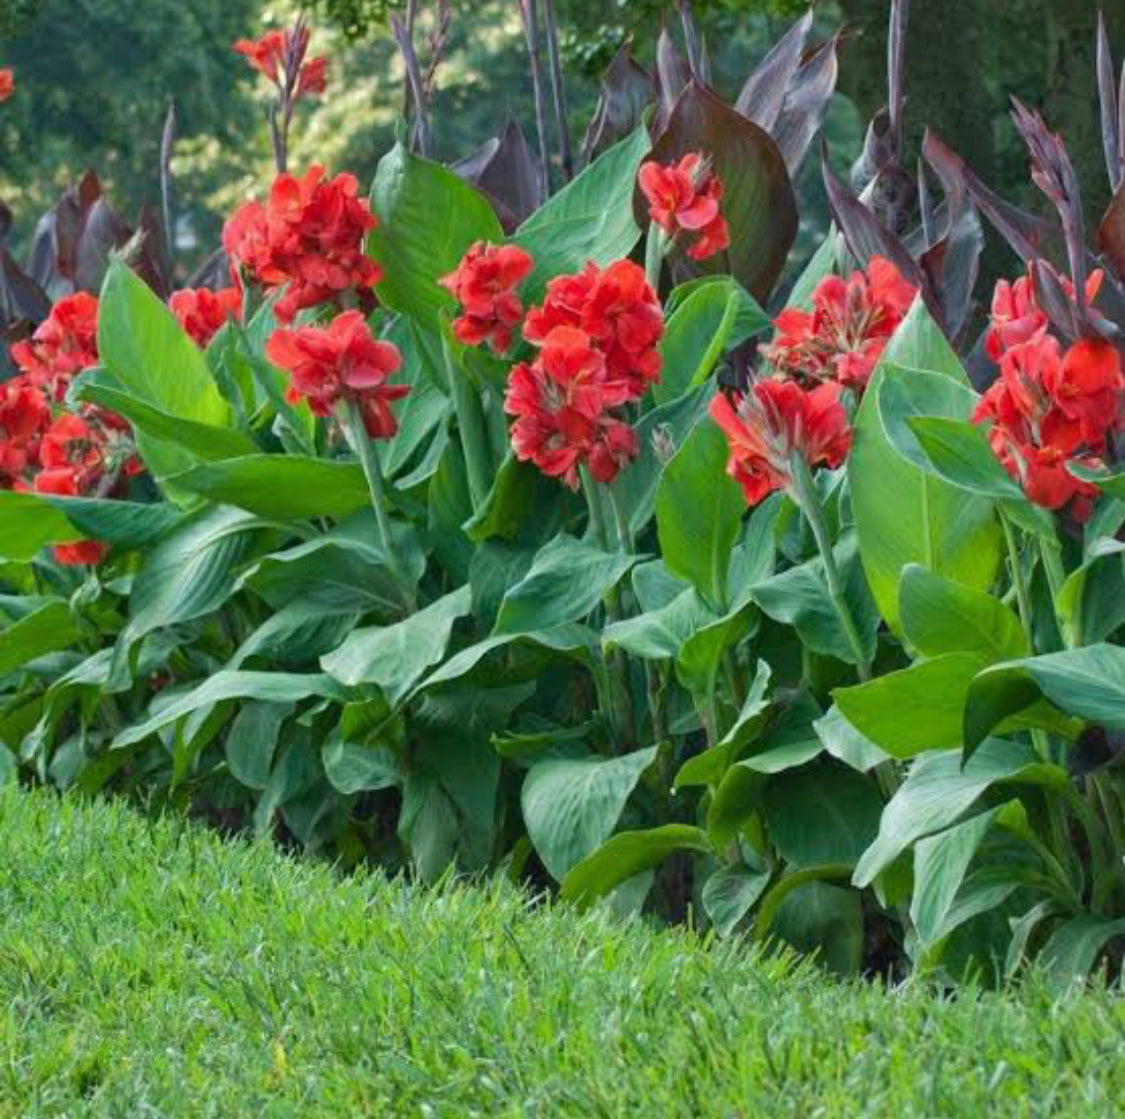 Canna lilly Red Hybrid